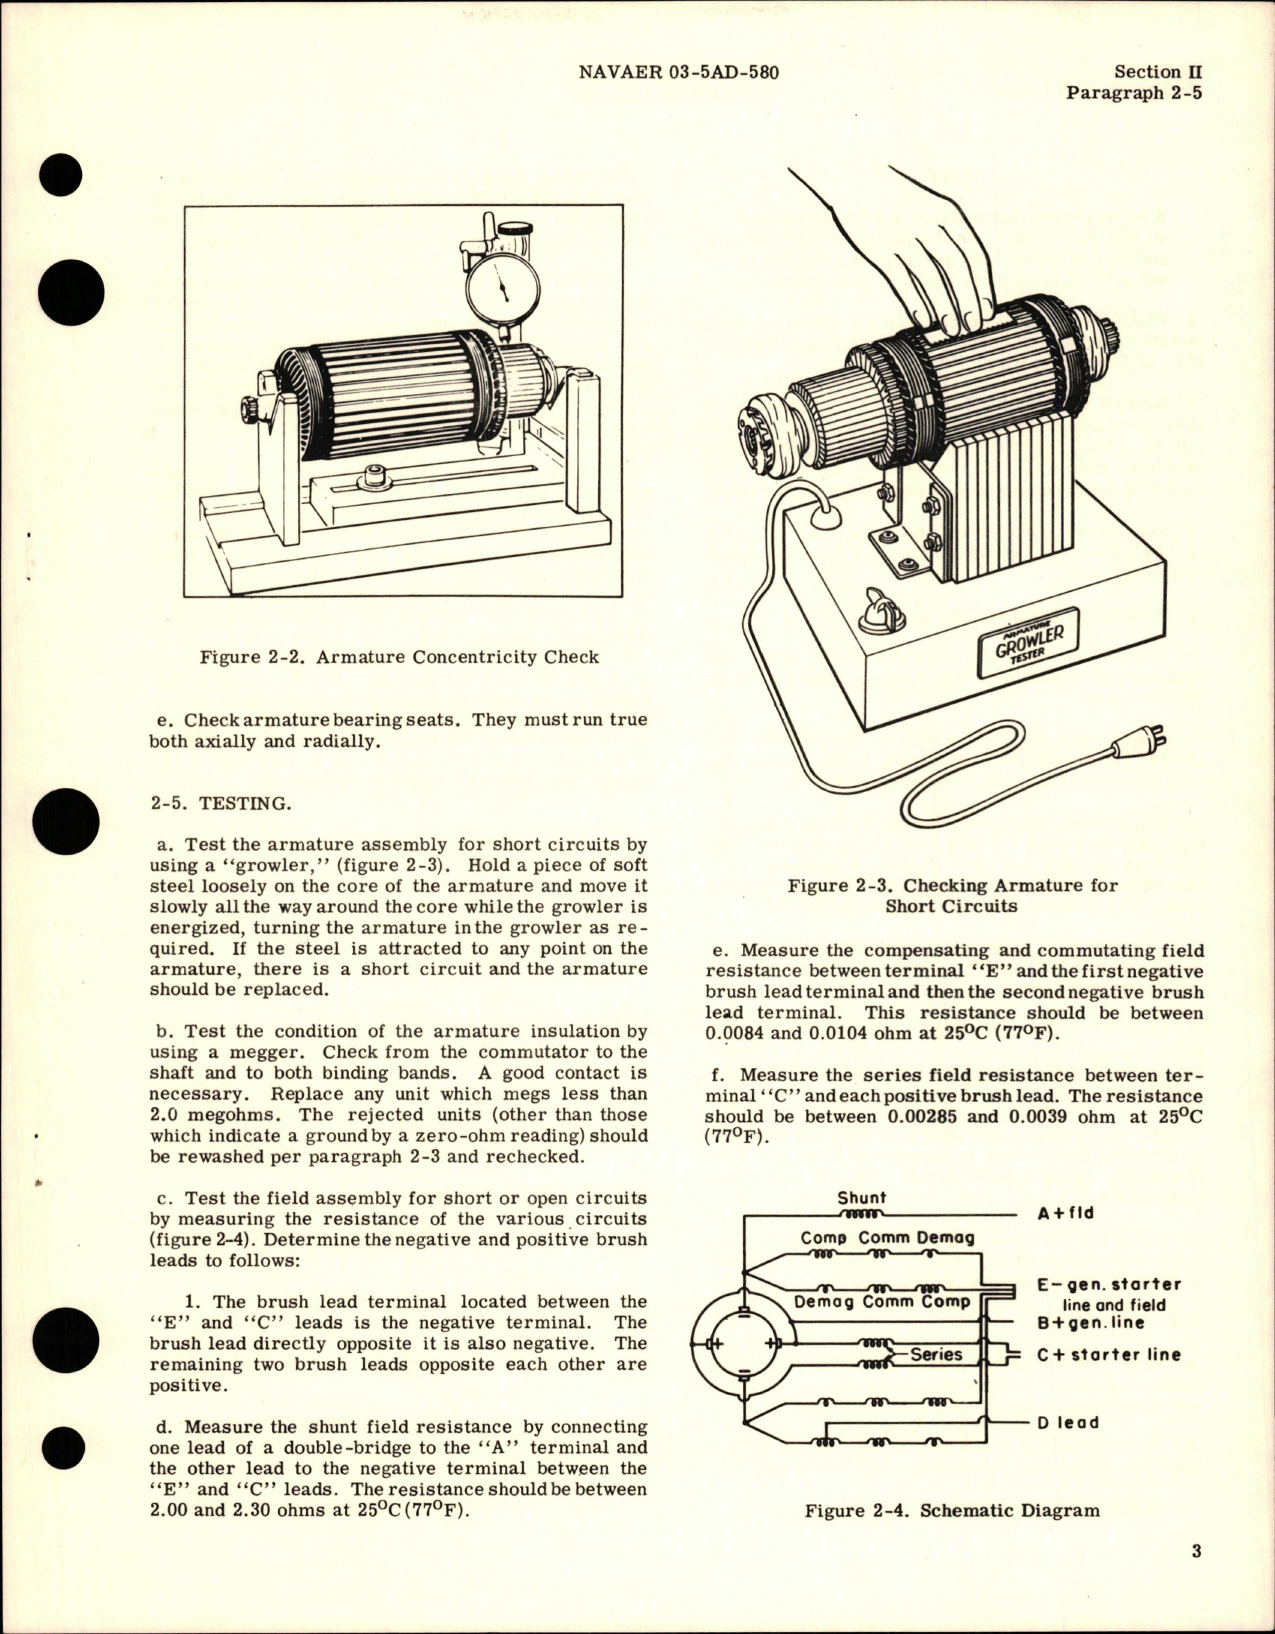 Sample page 7 from AirCorps Library document: Overhaul Instructions for Aircraft DC Starter Generator - Models 2CM88D4AB and 2CM88D4E 